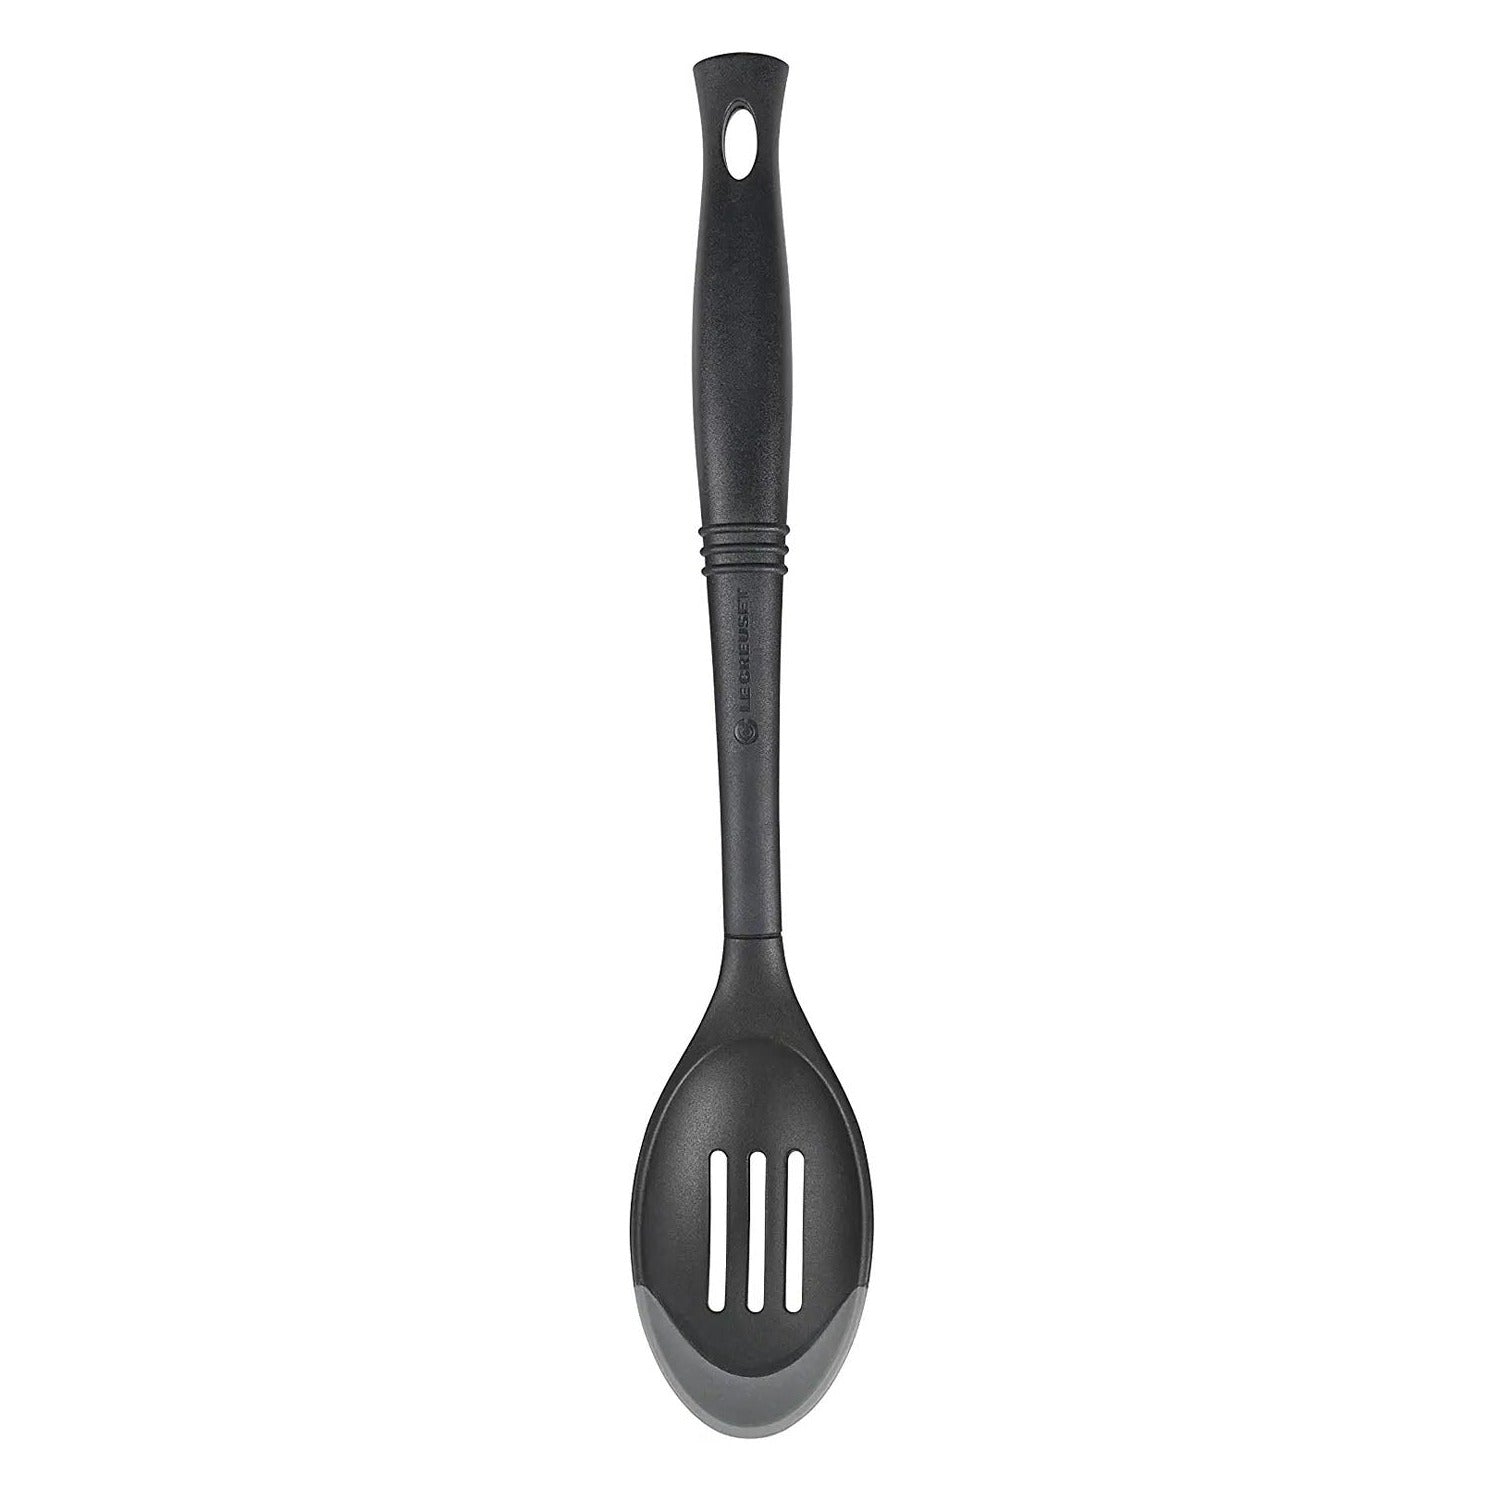 Material | The Slotted Spatula